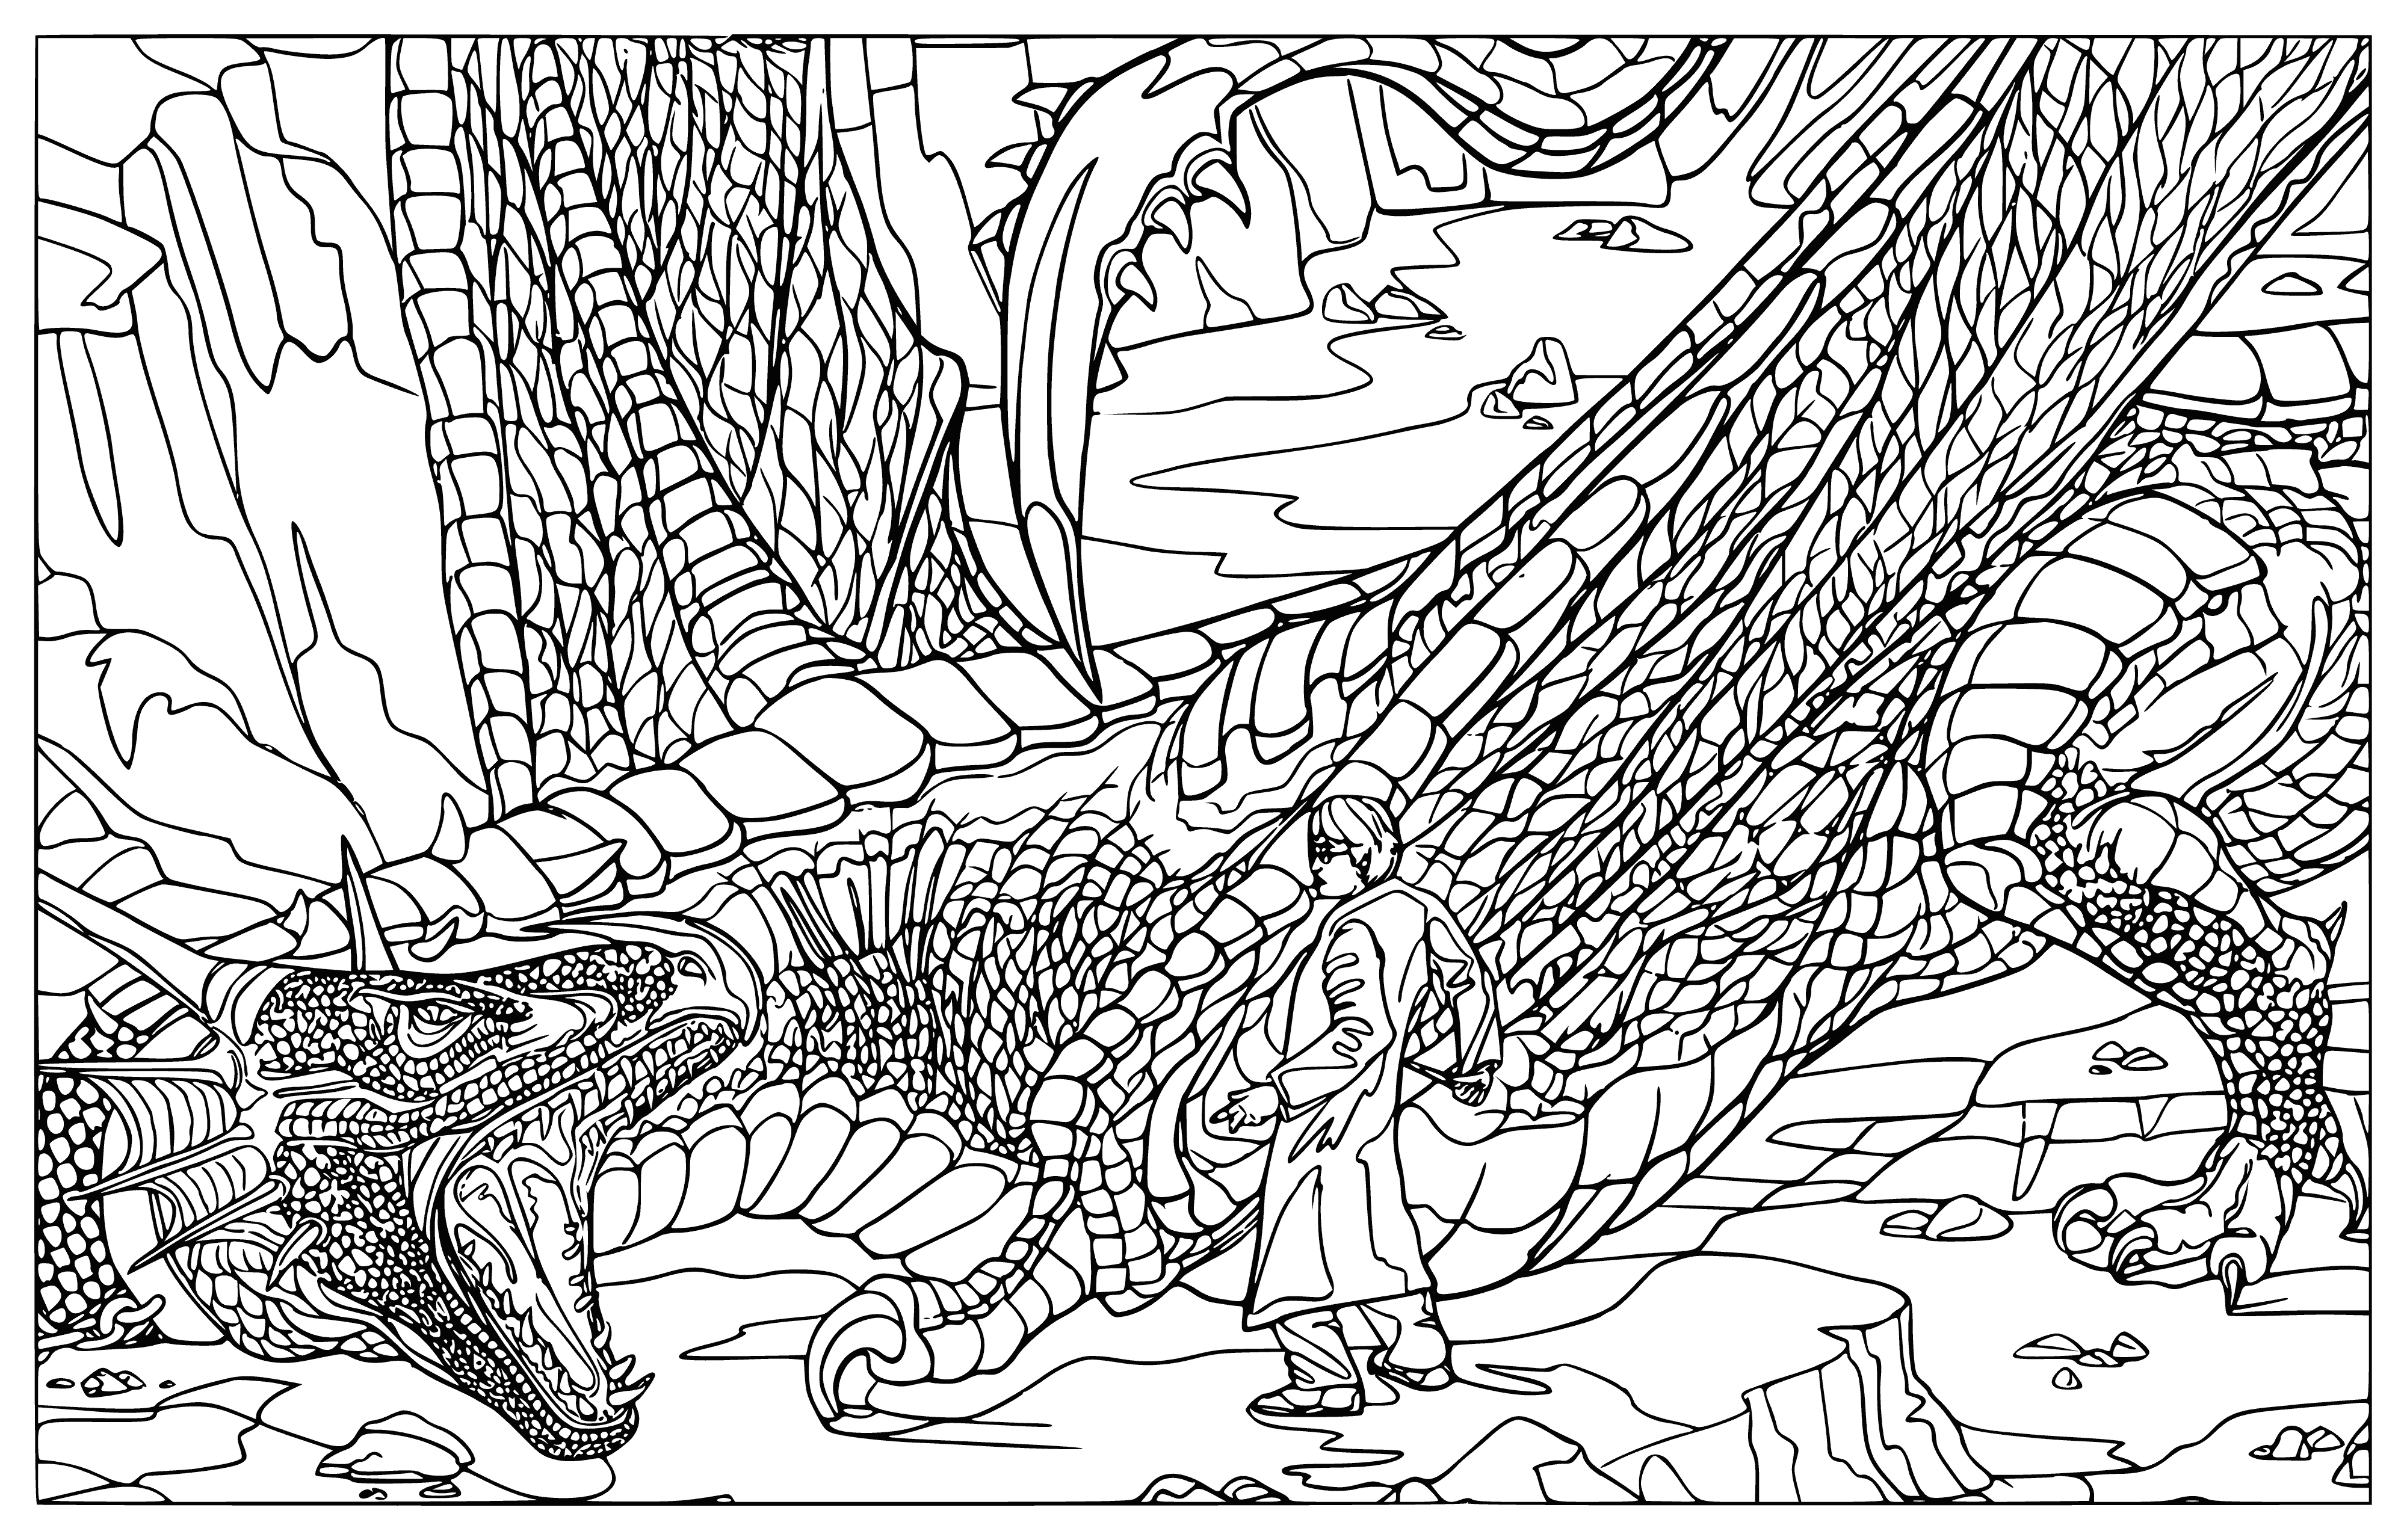 Harry and the dragon coloring page